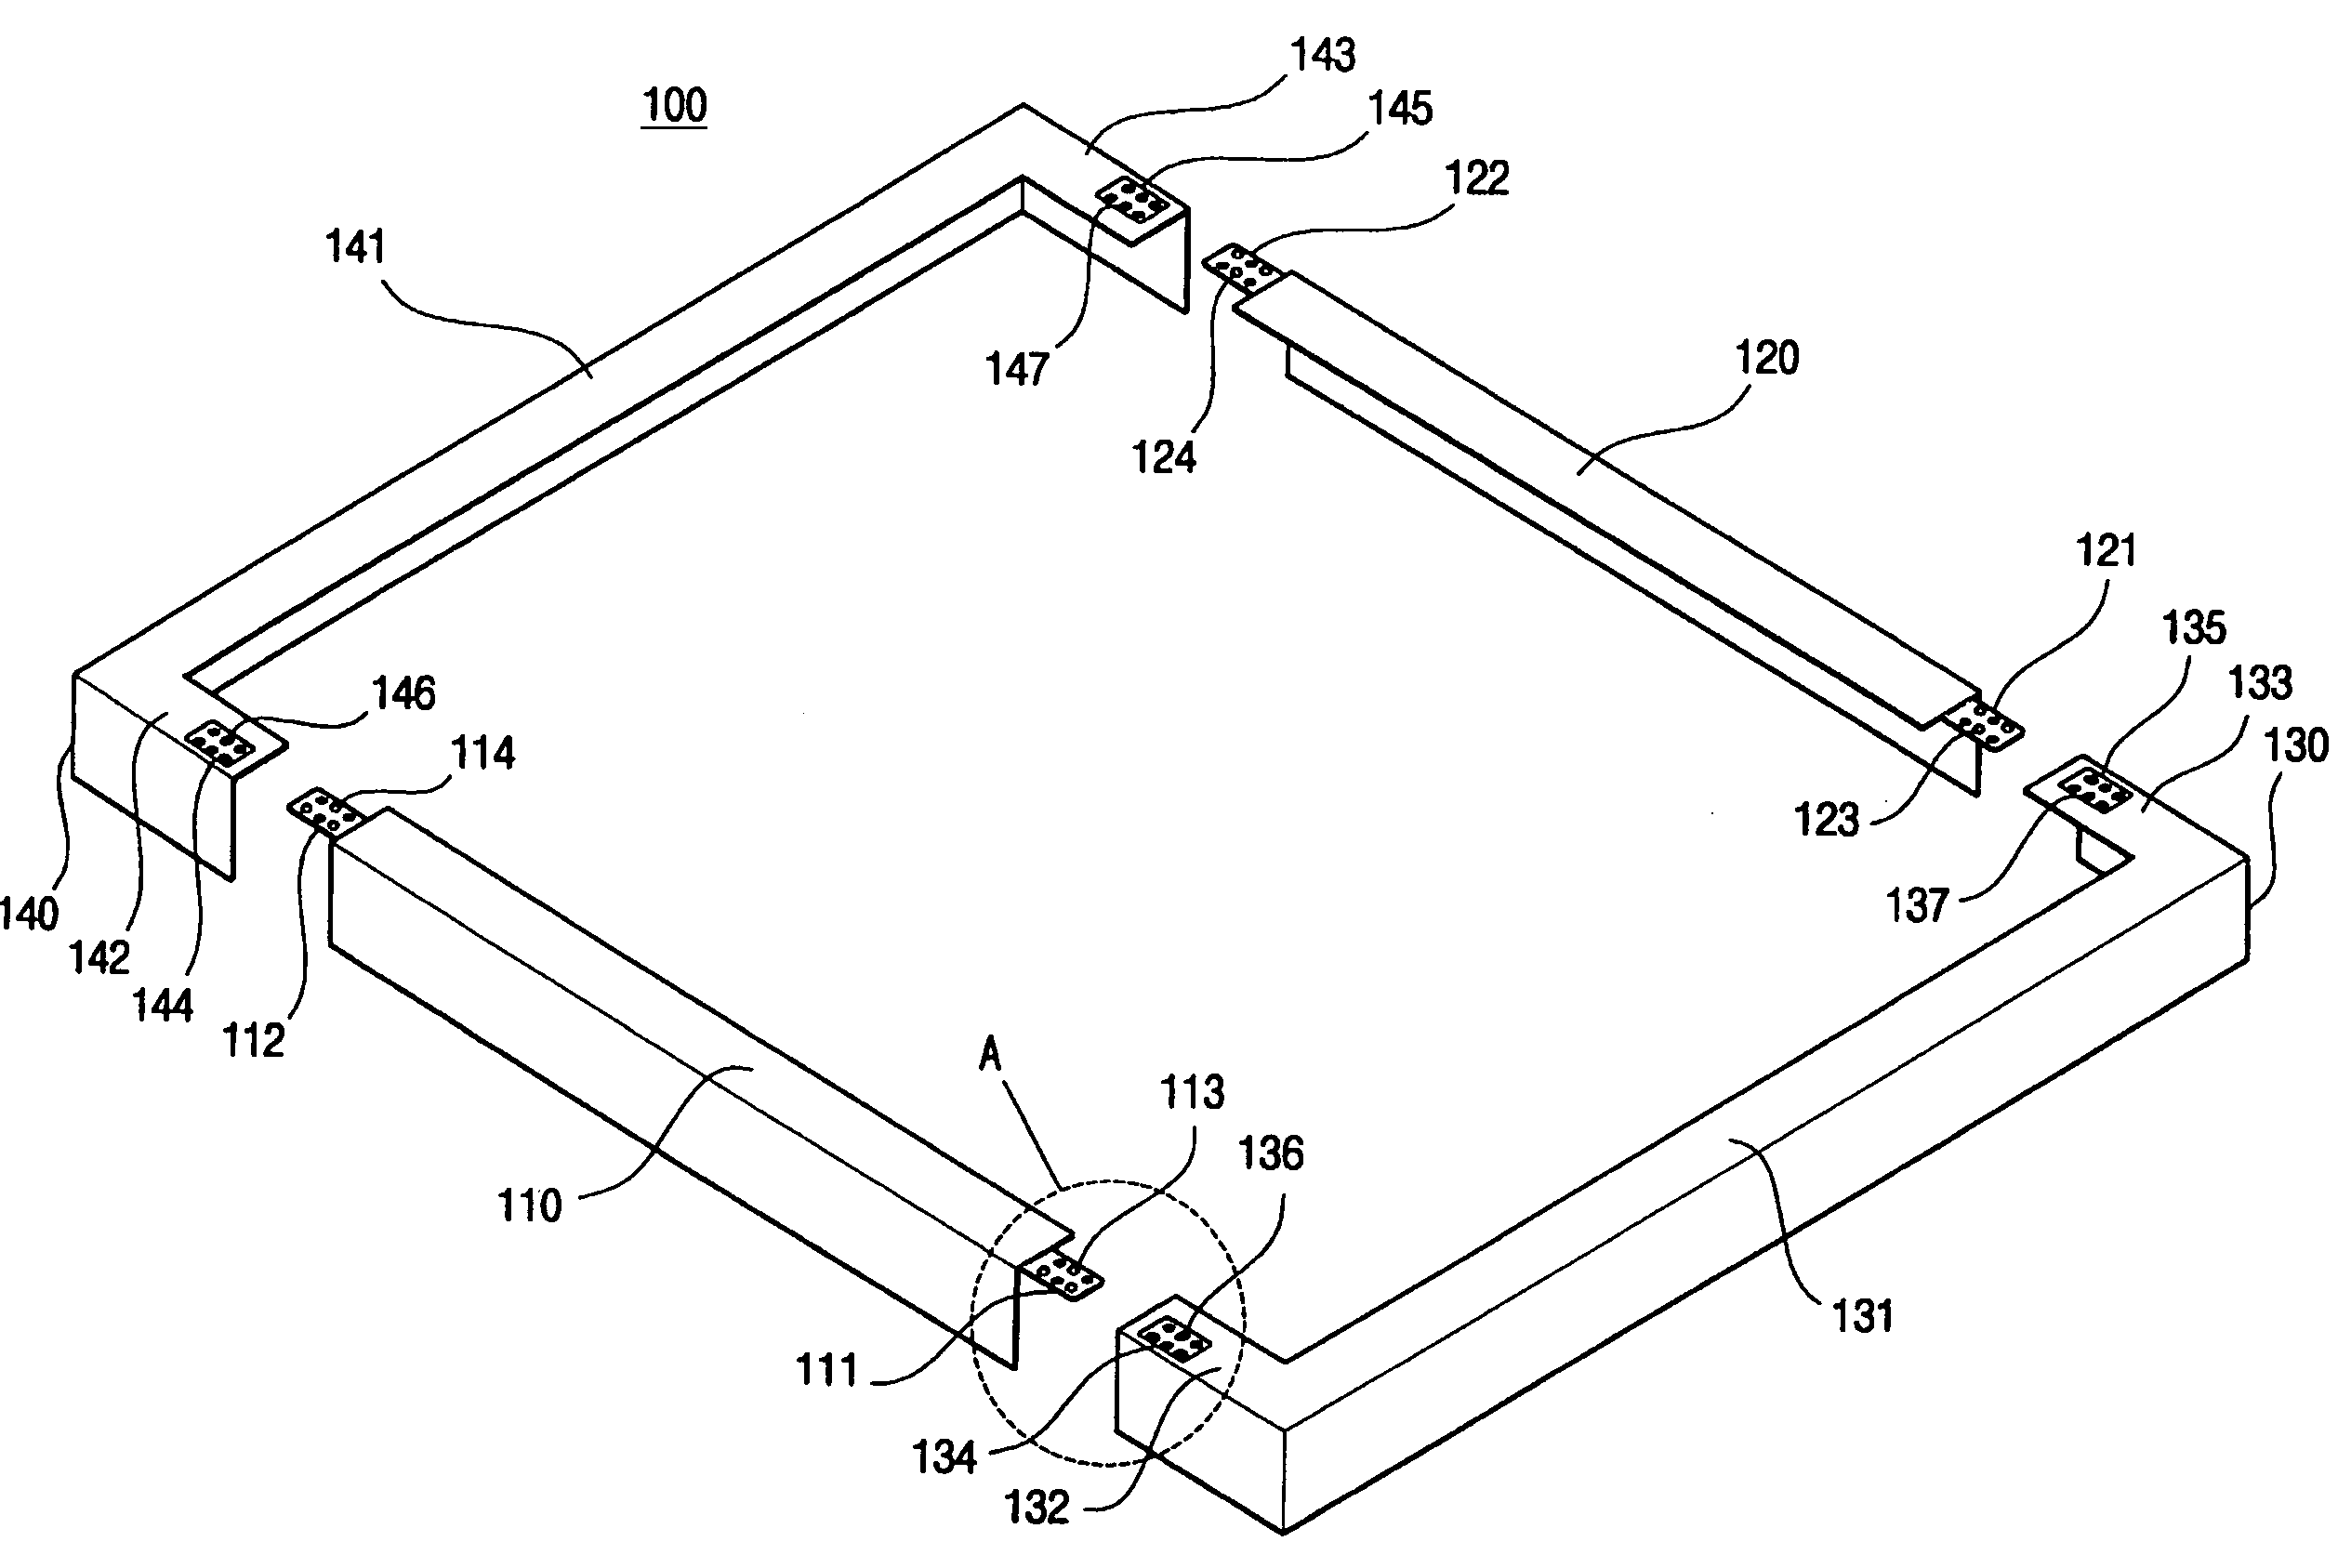 Chassis and display device having the same